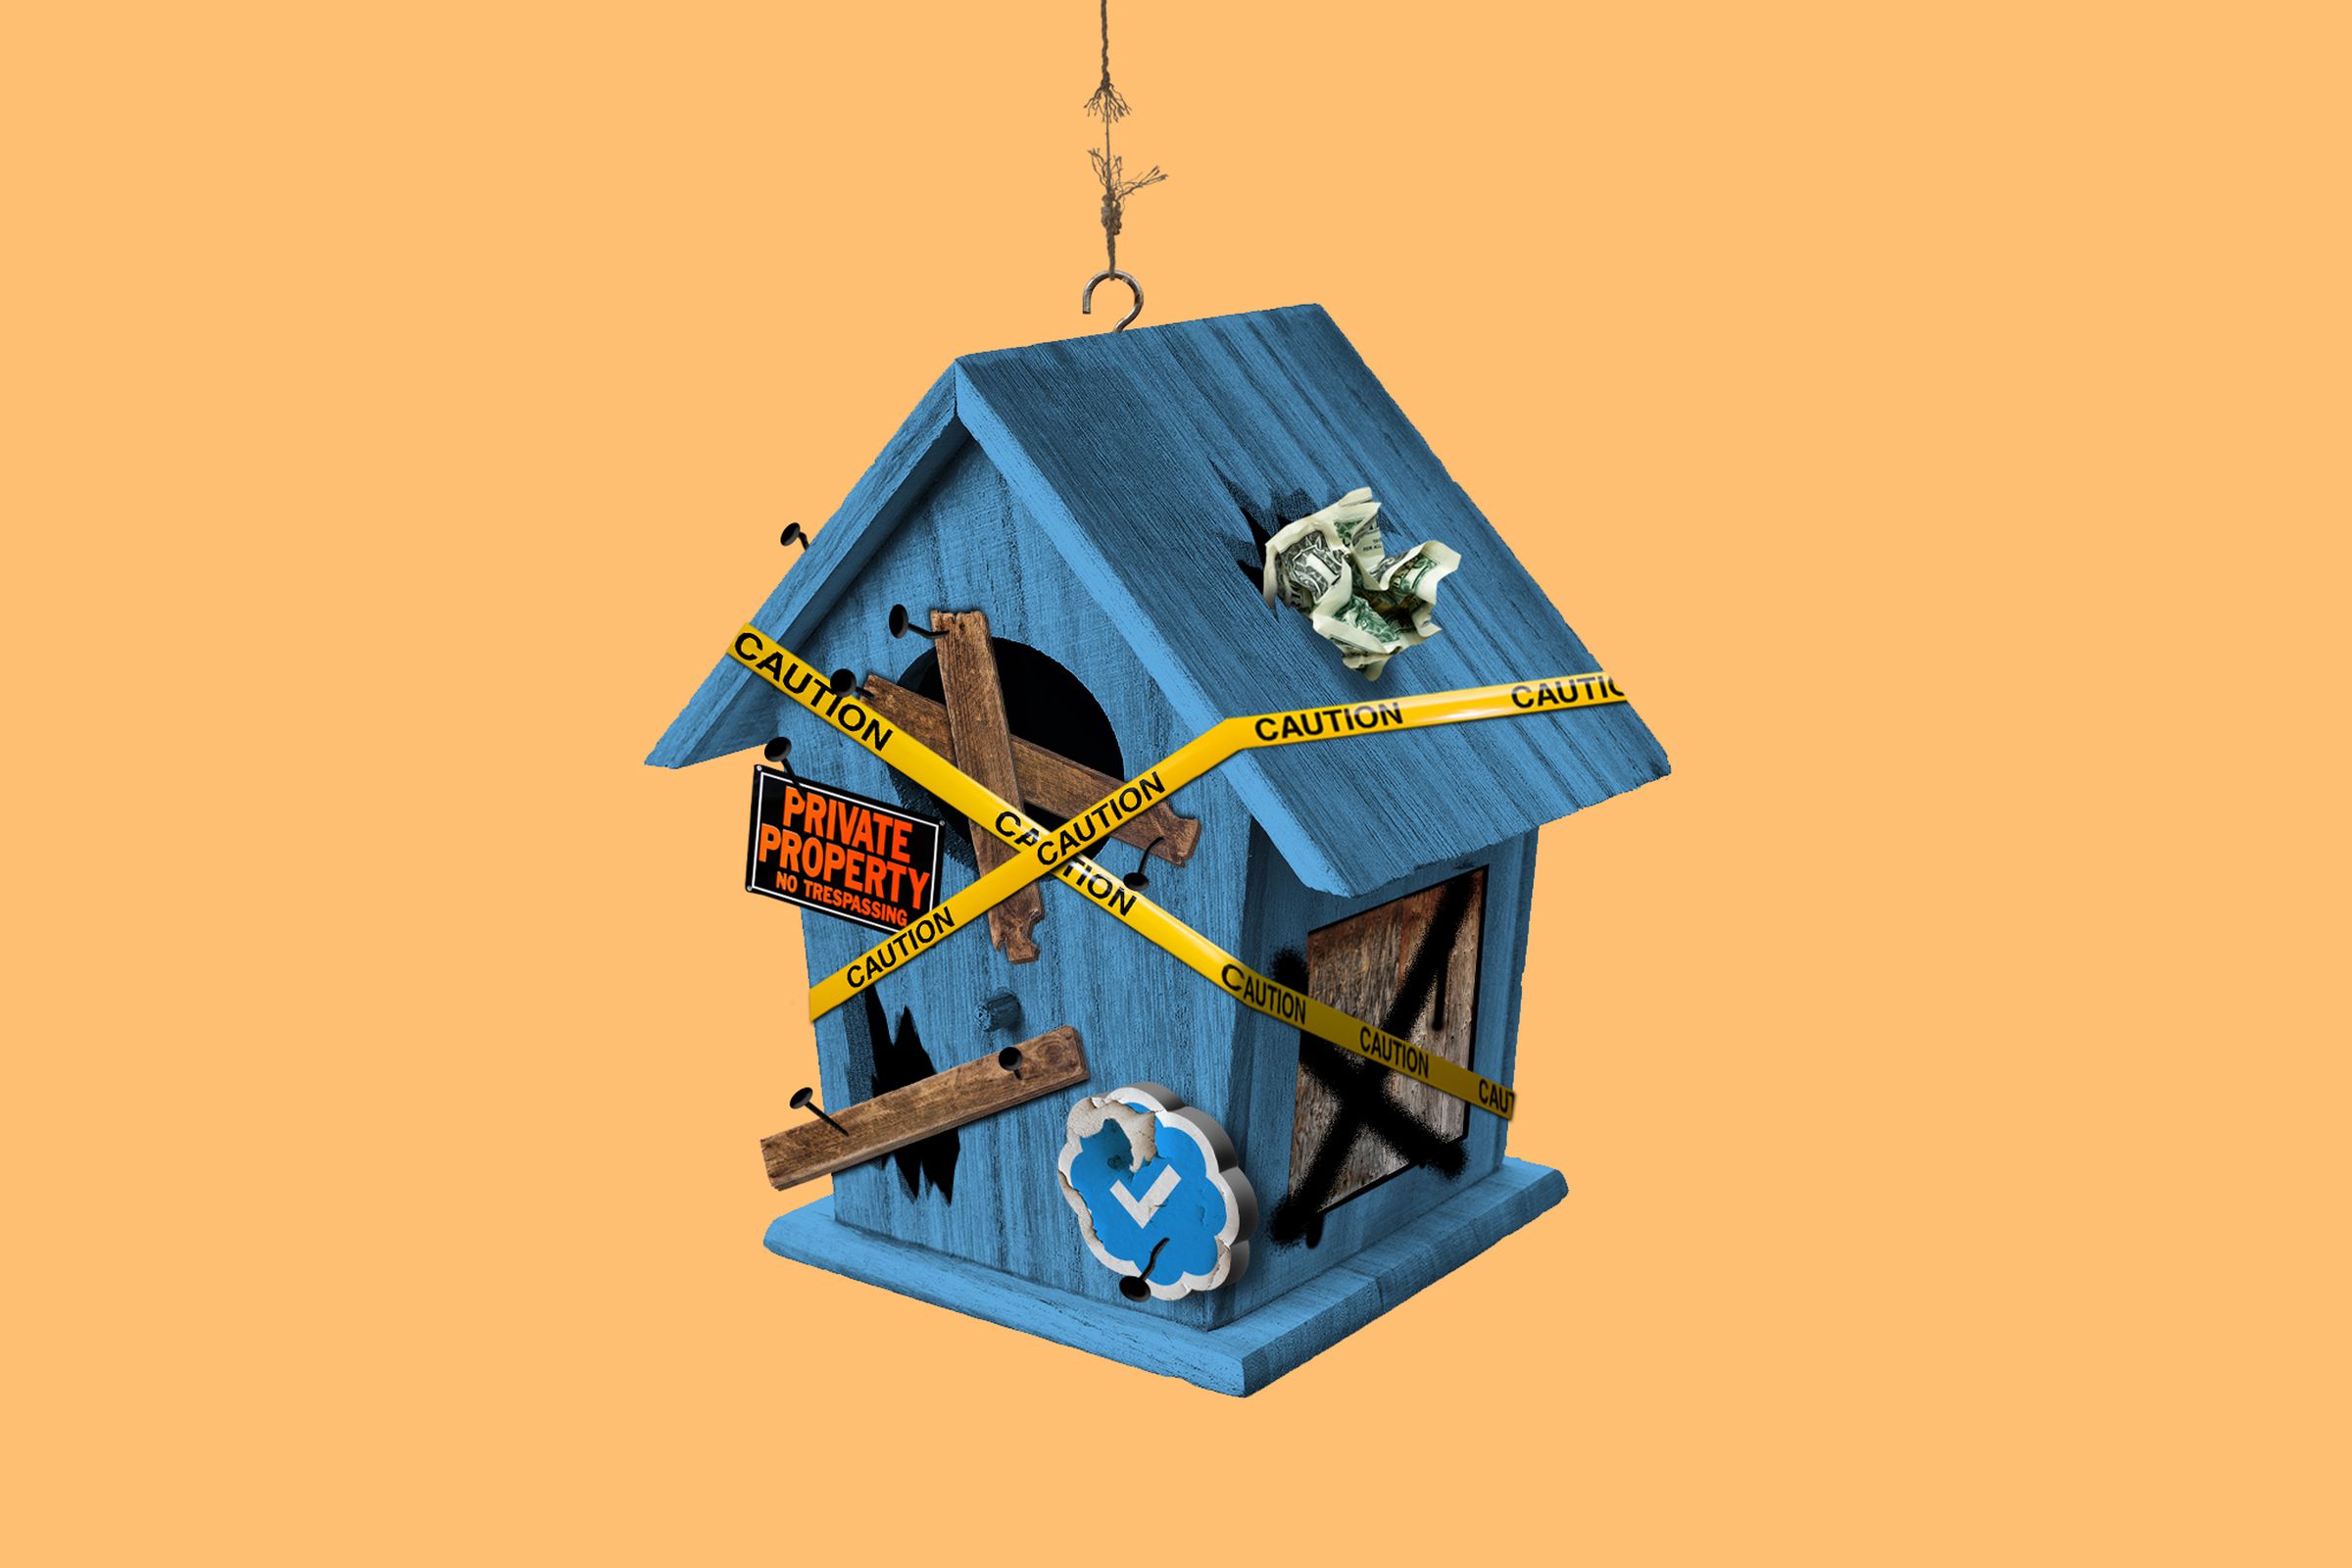 Photo illustration of a condemned birdhouse, covered in graffiti and caution tape.